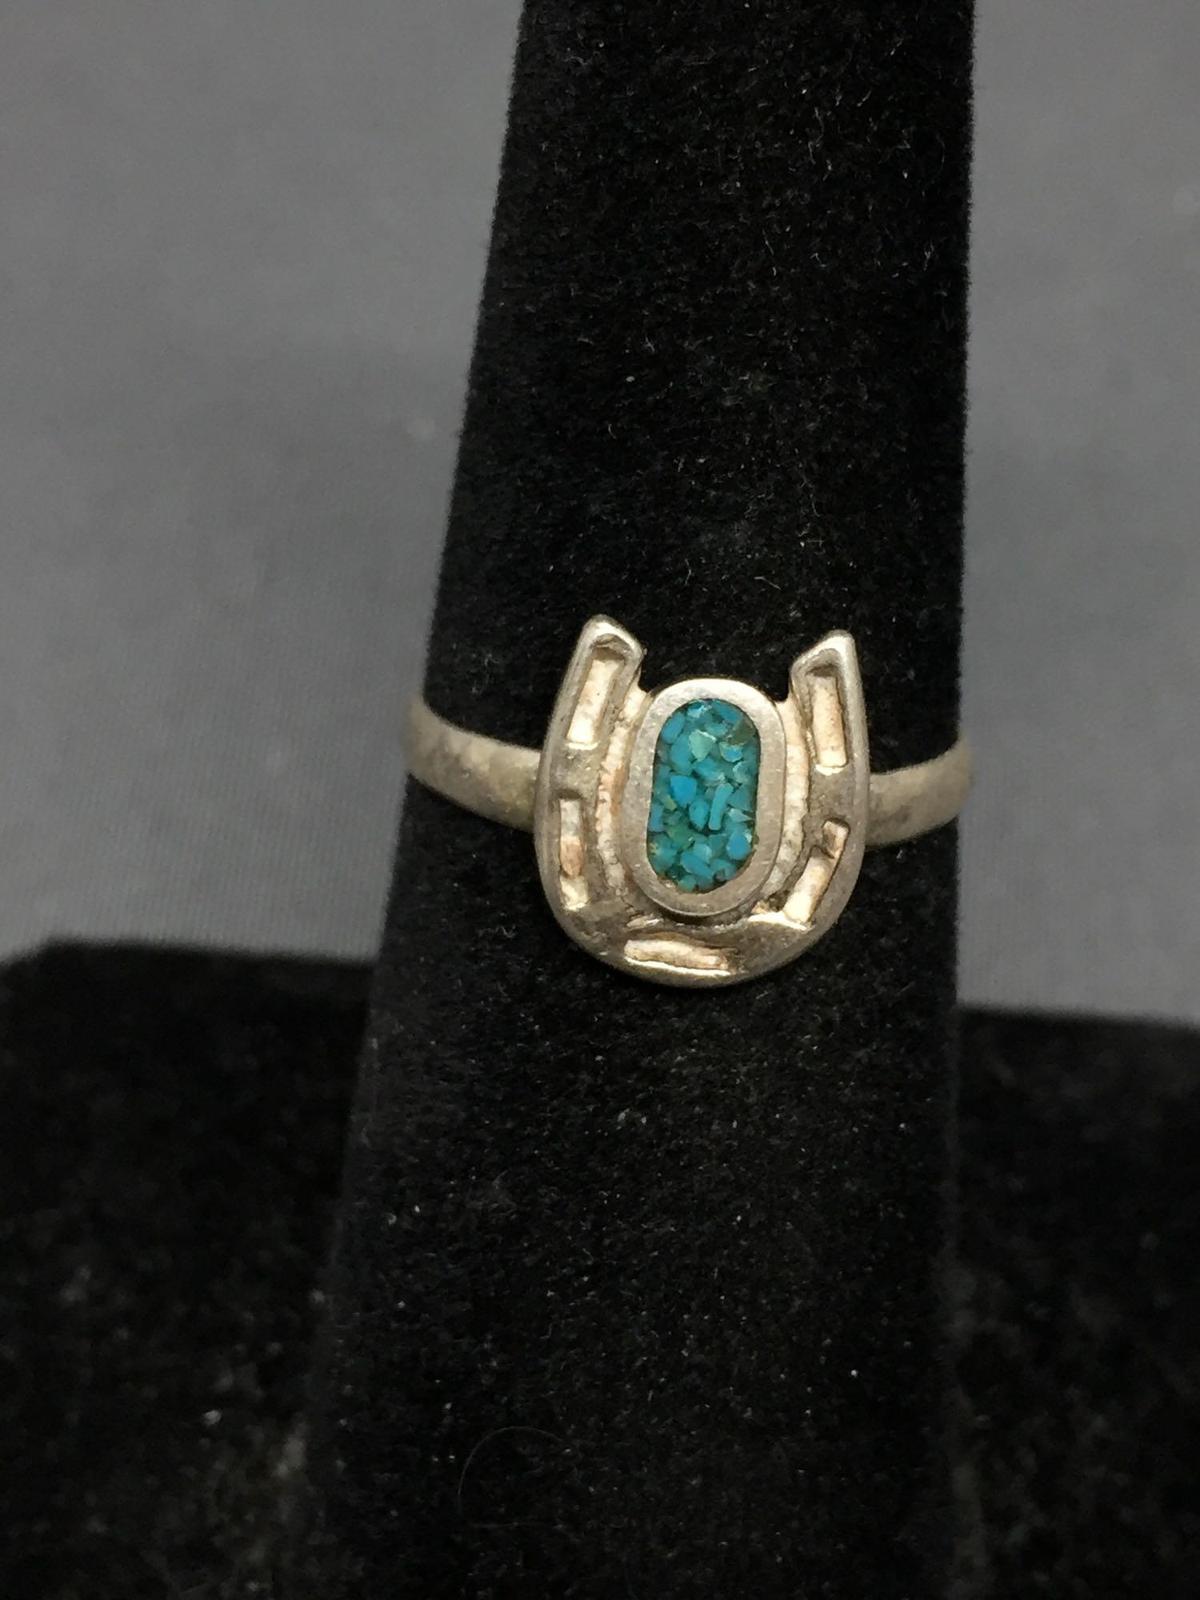 Turquoise Inlaid 10x9mm Lucky Horseshoe Motif Sterling Silver Ring Band